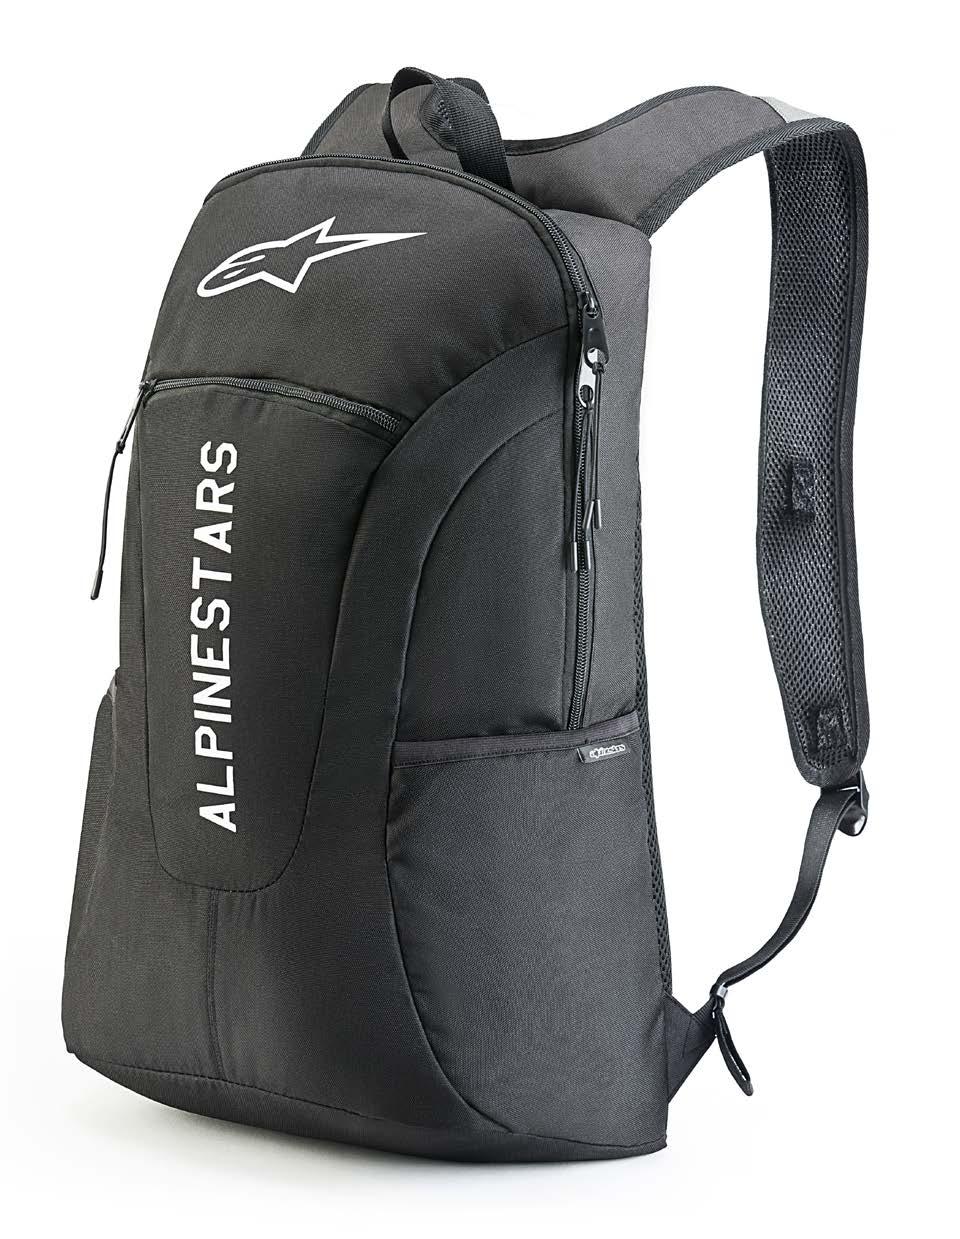 GFX BACKPACK 1119-91200 O/S 100% Polyester 600D + TPE MID SIZE DAILY